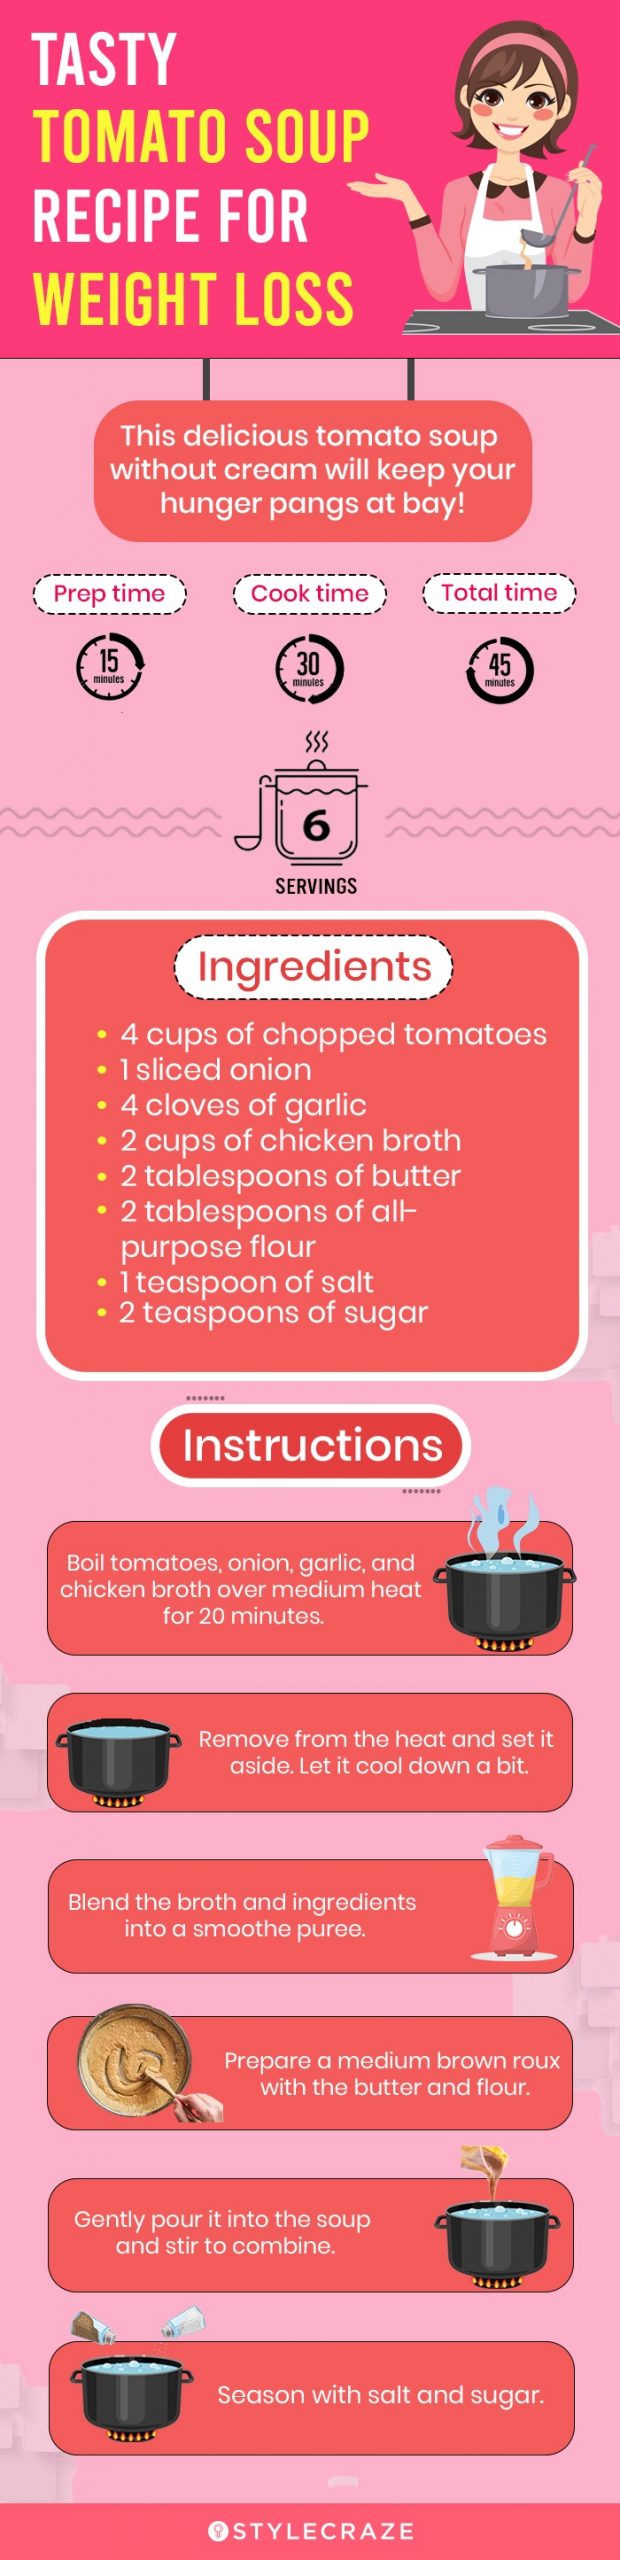 tasty tomato soup recipe for weight loss (infographic)